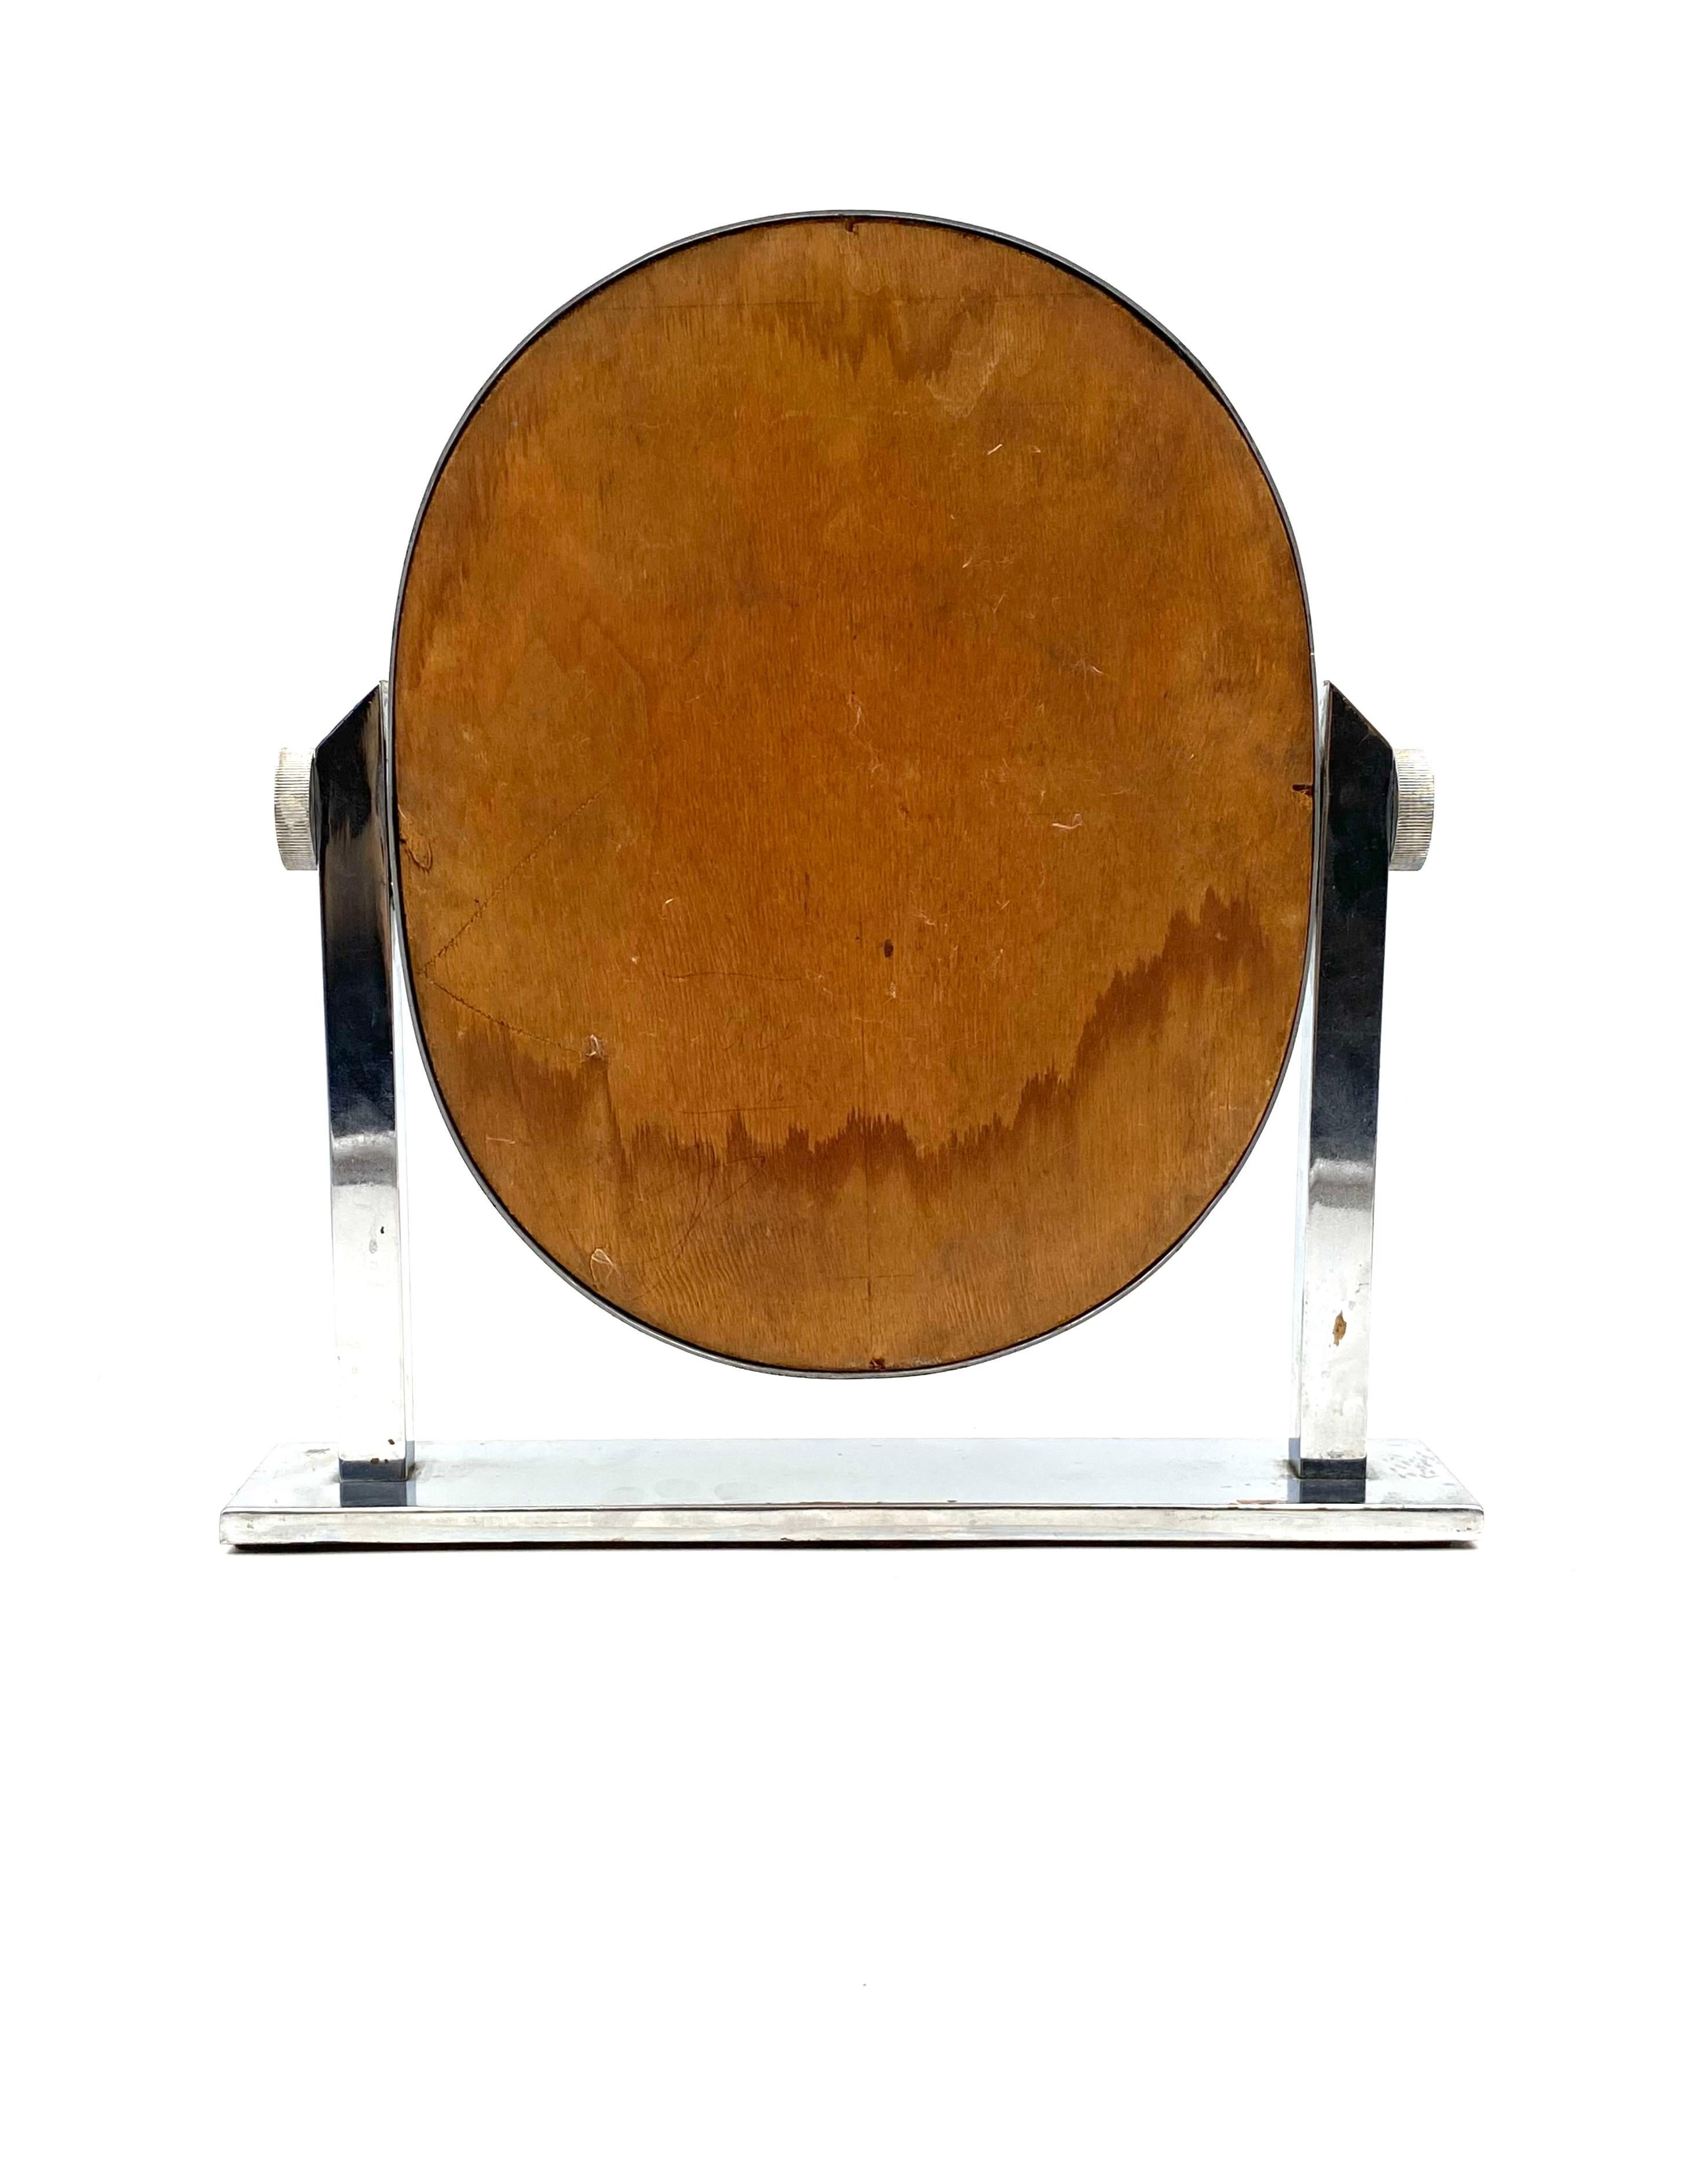 Midcentury Nickel-Plated Brass Table Mirror / Vanity, Italy, 1960s For Sale 8